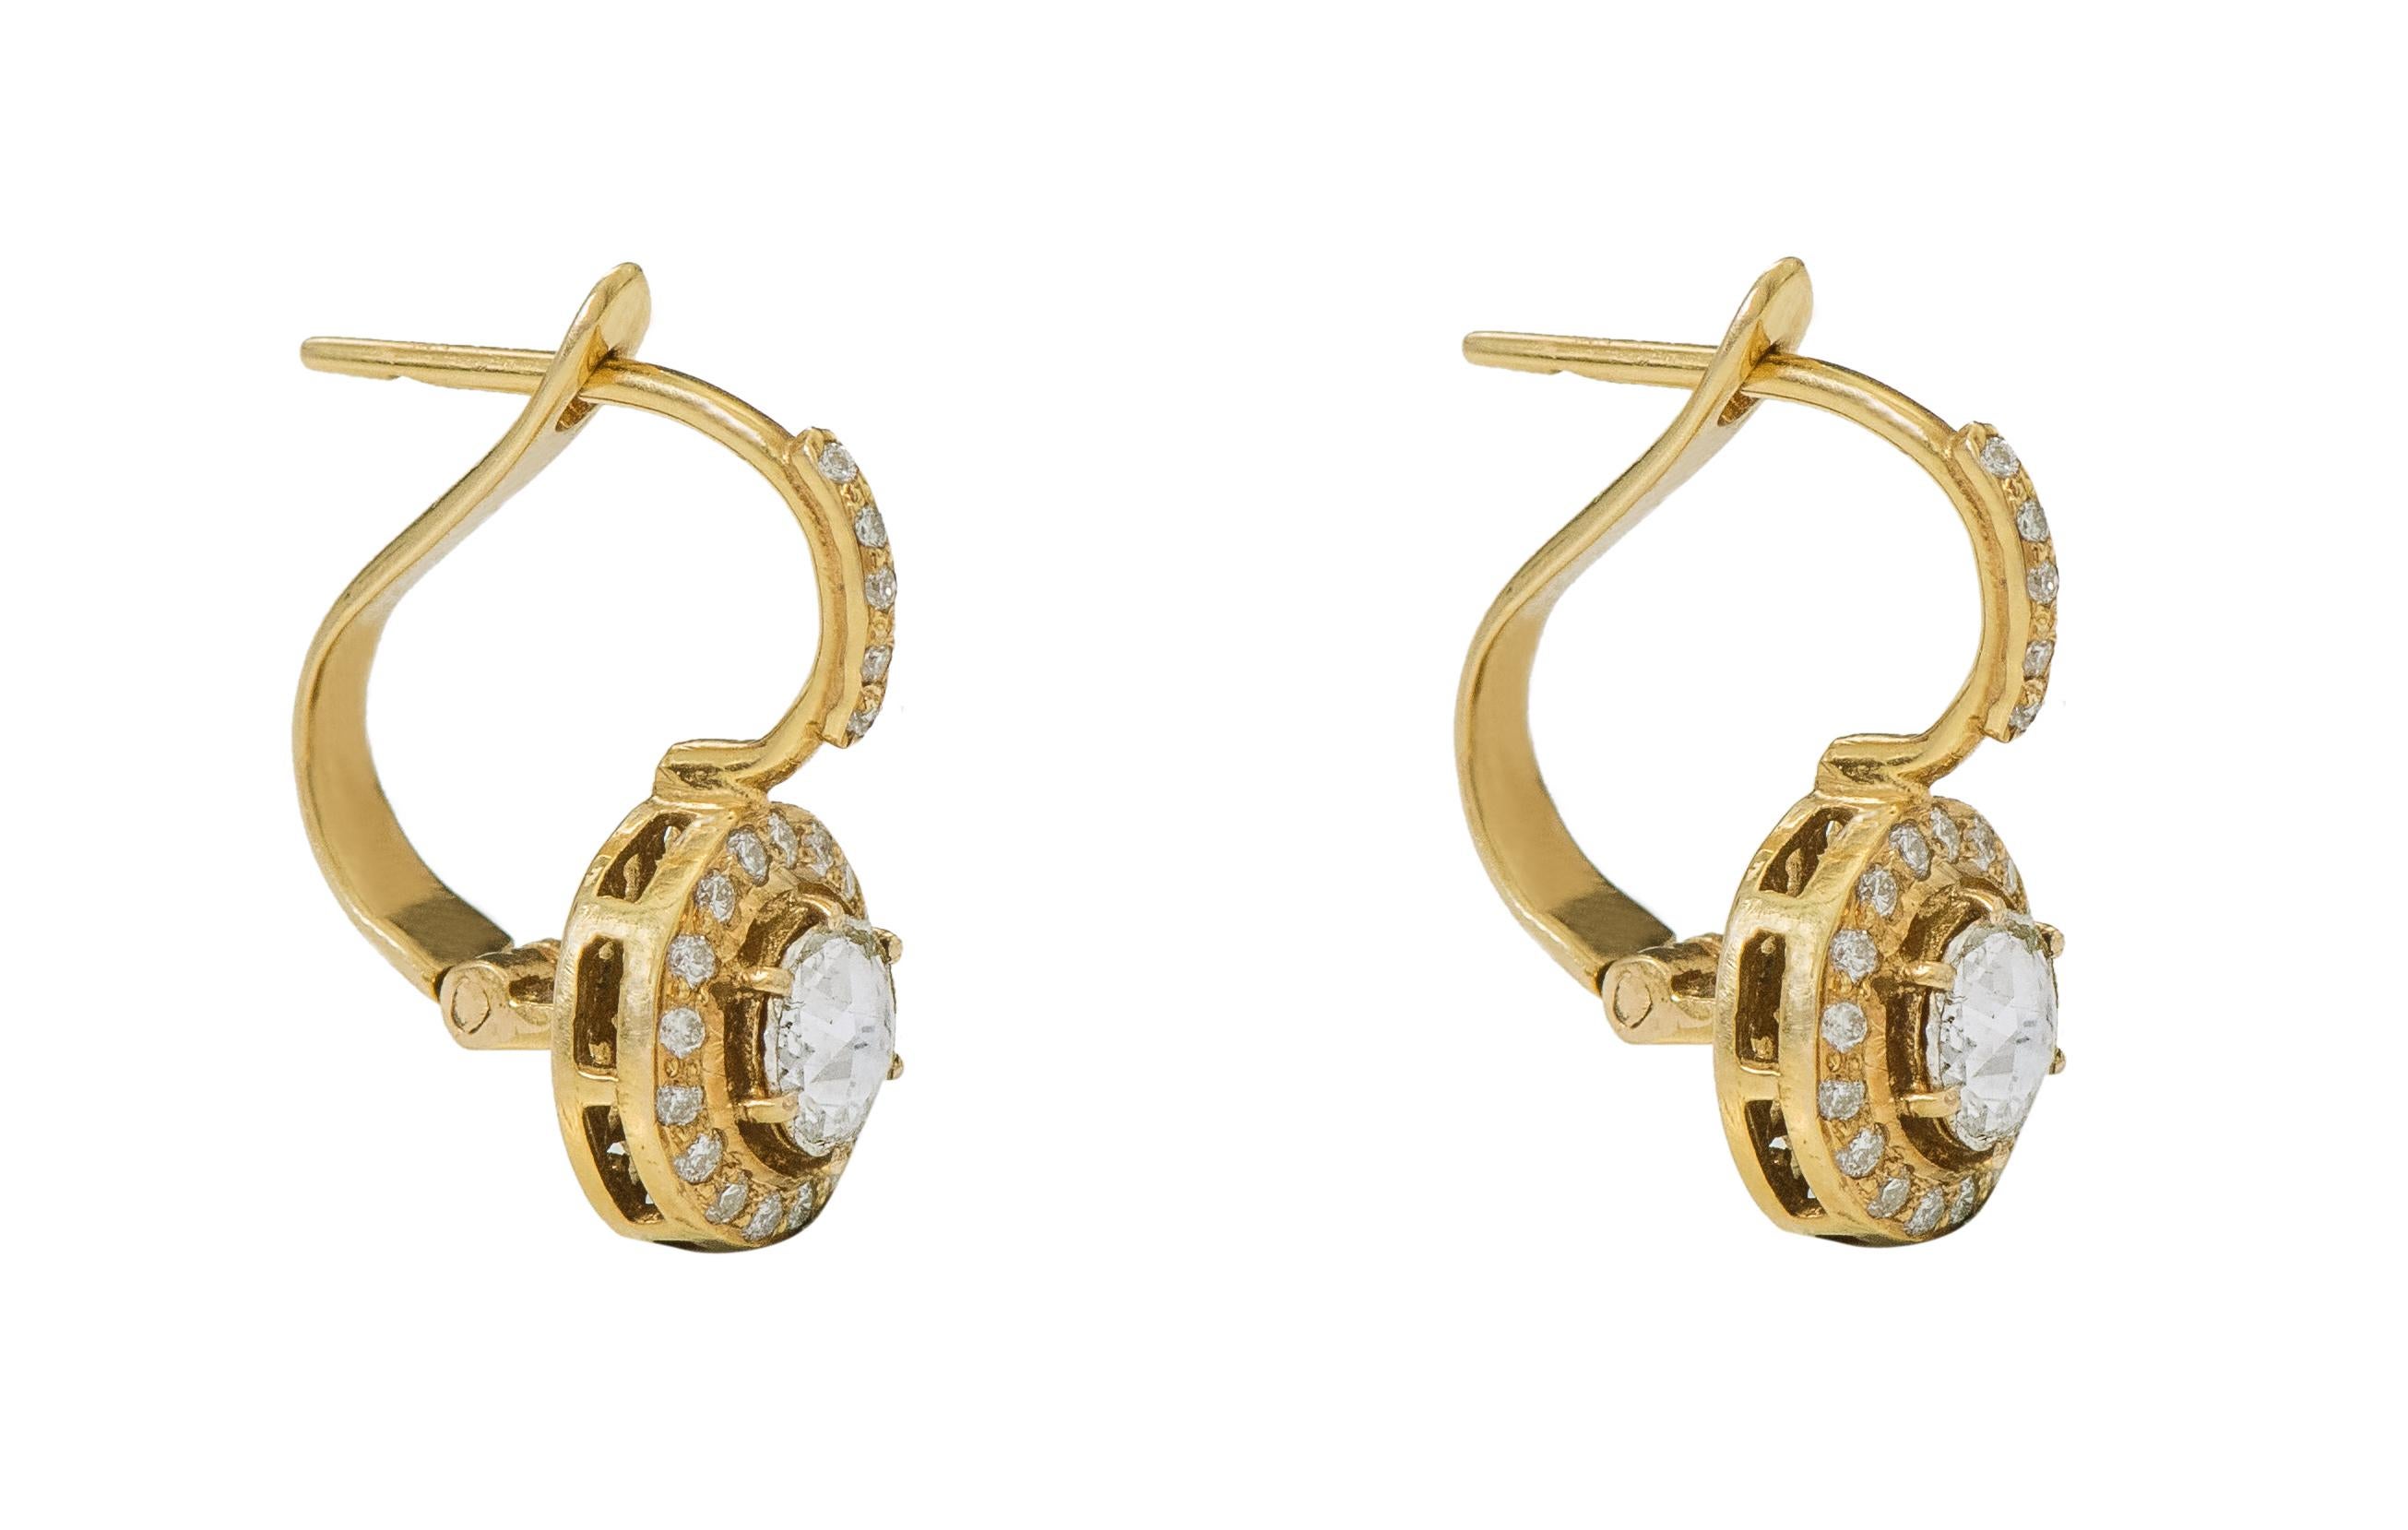 18 Karat Yellow Gold Rose-Cut Solitaire Diamond Drop Earrings in Art-Deco Style

This Victorian period art-deco style sensational diamond rose cut cluster earring is beautiful. The round rose cut solitaire diamond in a six-prong setting creates a